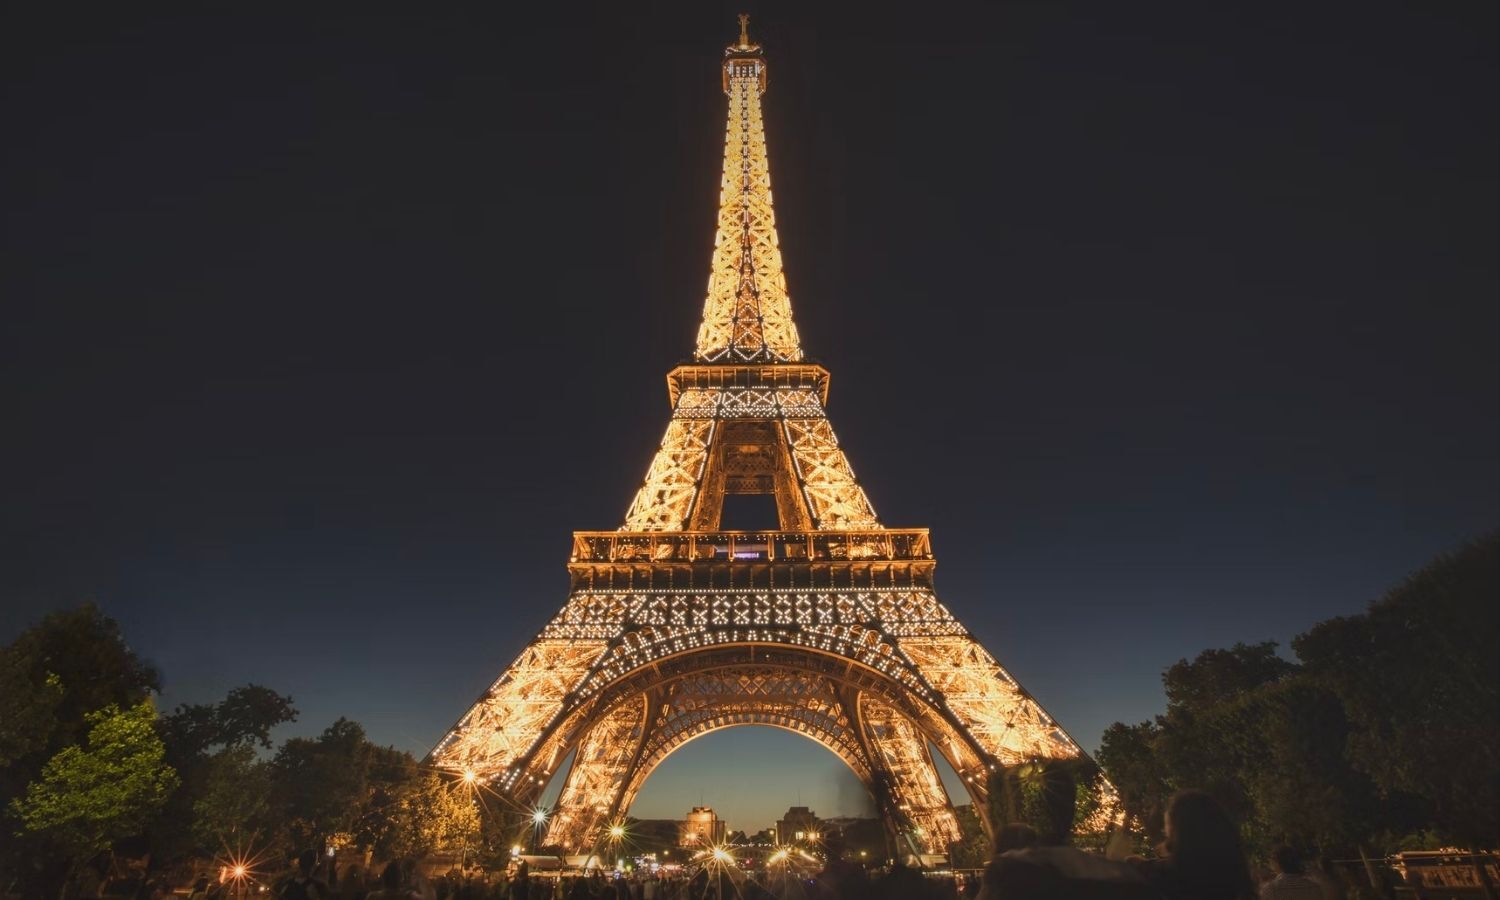 Paris to host 2024 Summer Olympics, with Eiffel Tower in starring role